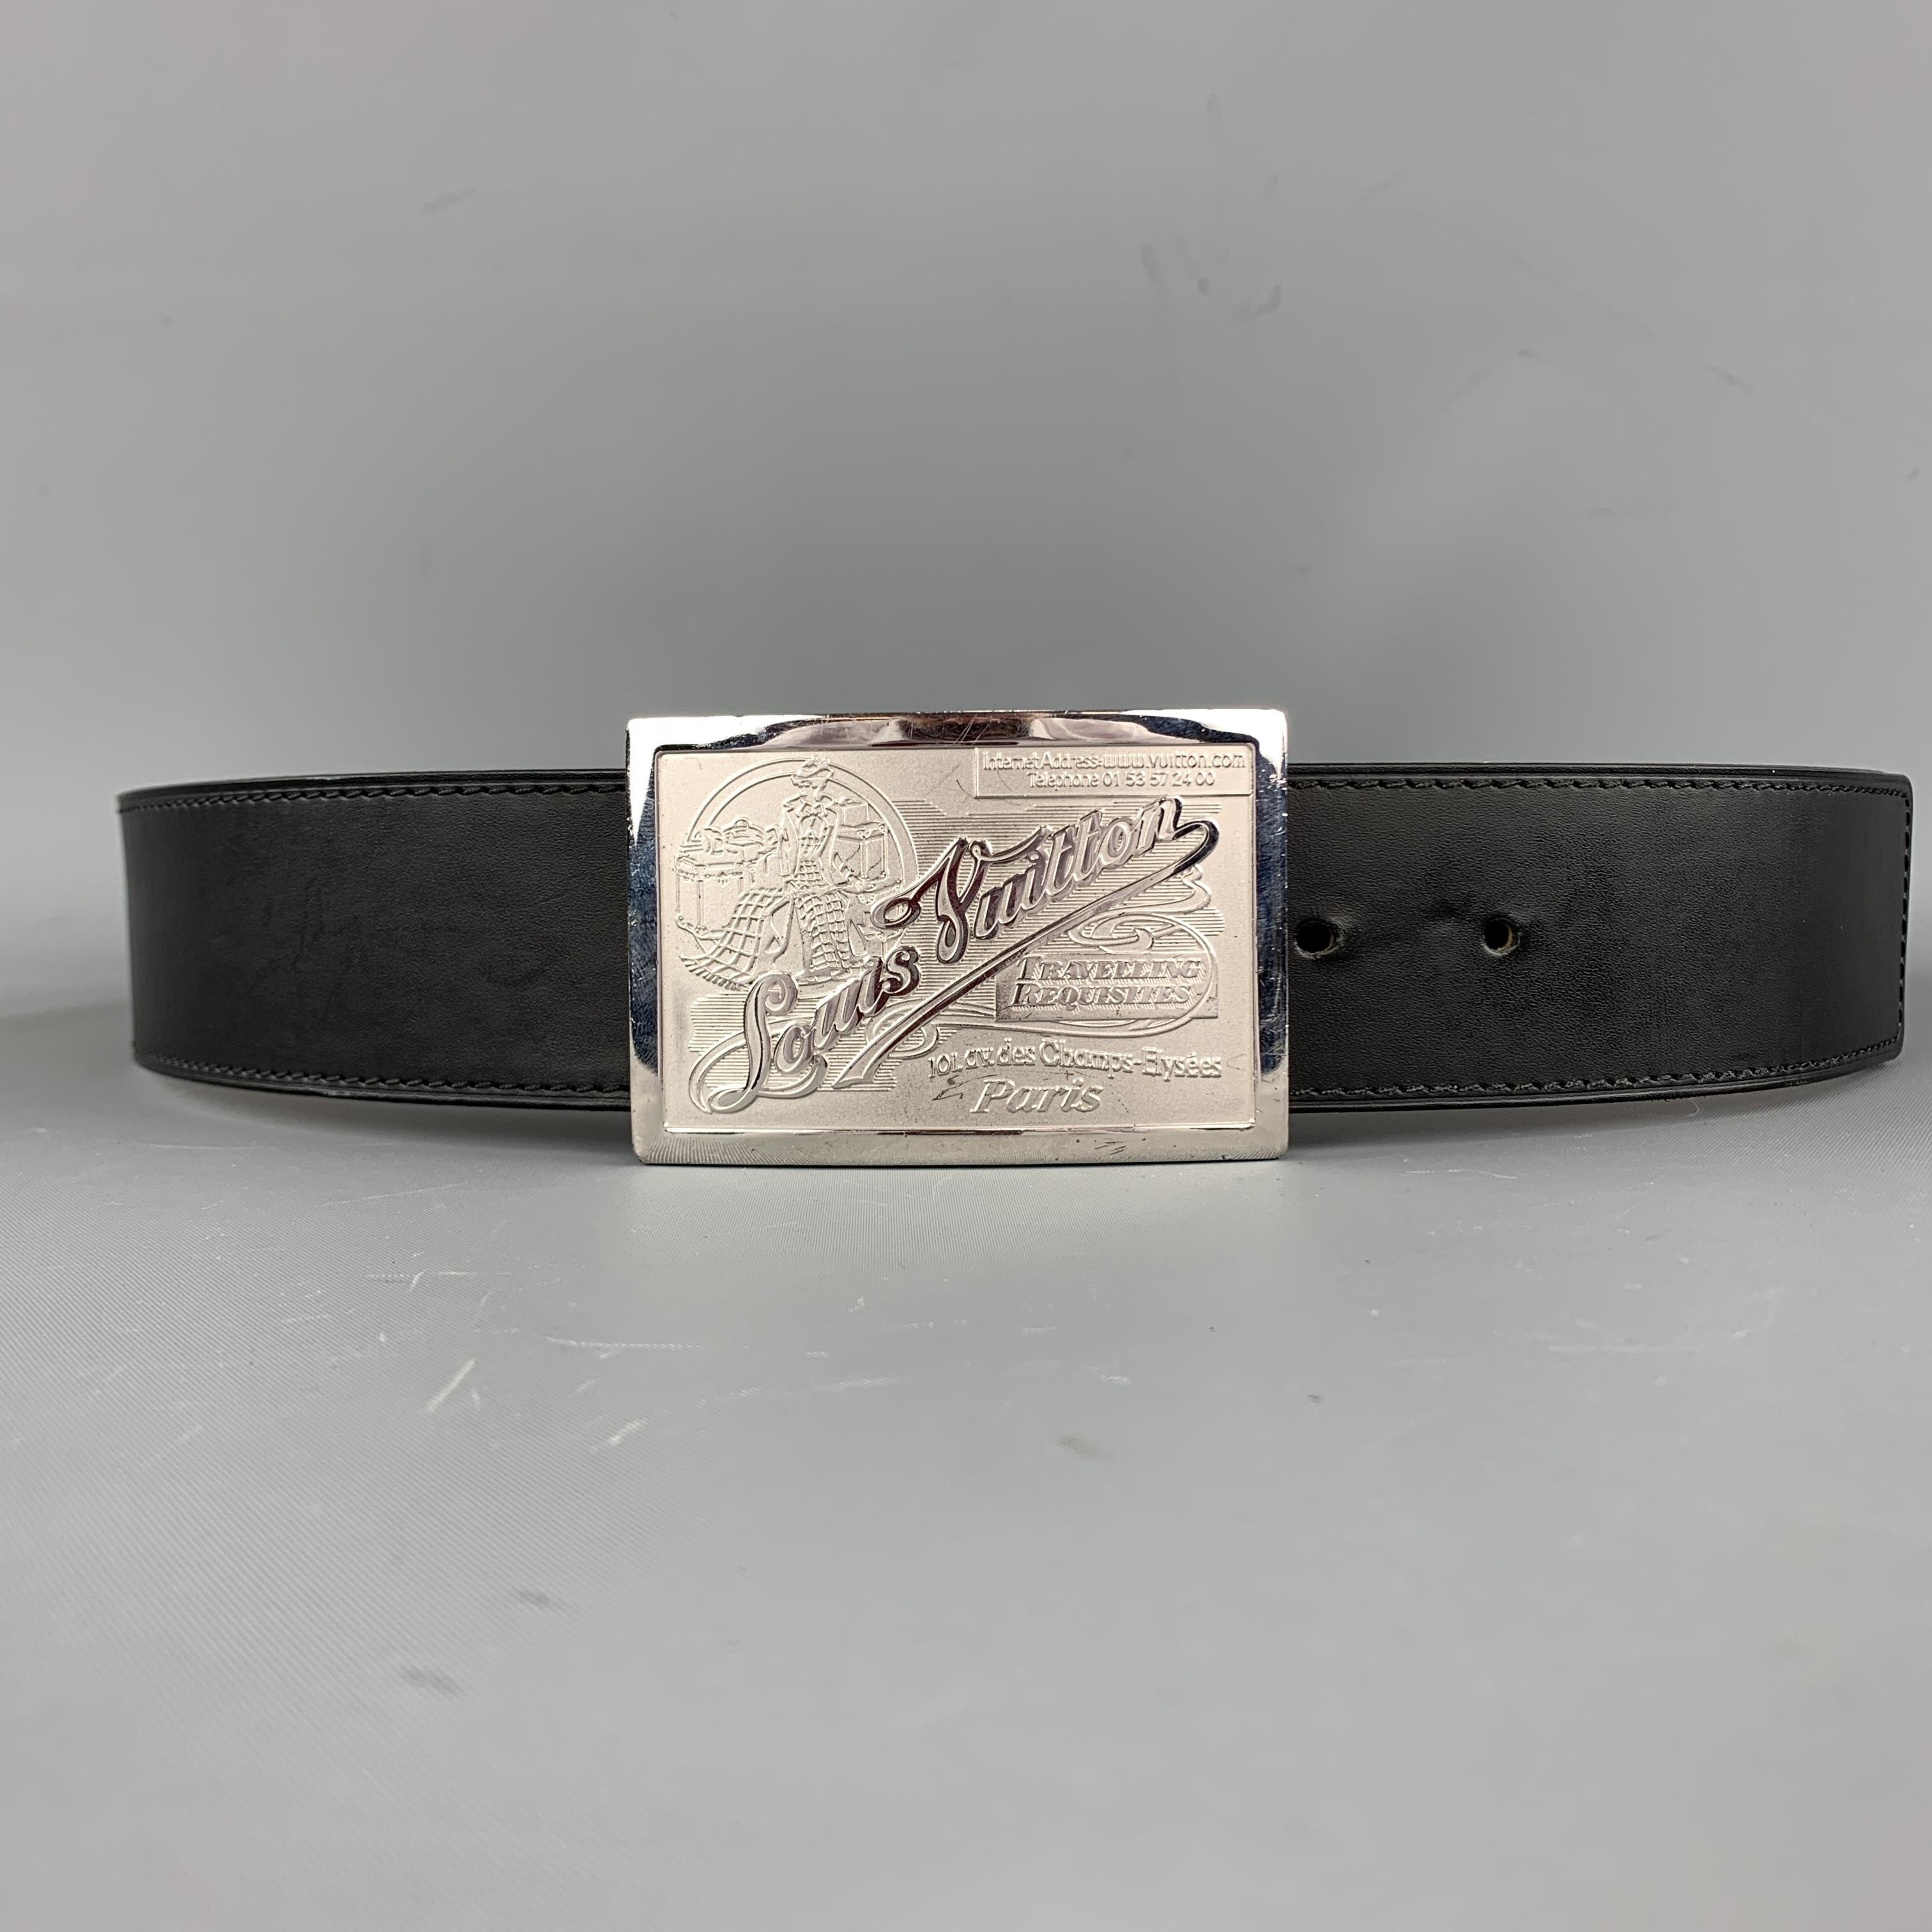 LOUIS VUITTON Travelling Requisites Belt comes in a black tone in a solid leather material, with silver-tone buckle featuring peg-in-hole closure. Light wear at leather strap and inner buckle. Made in Spain.
 
Very Good Pre-Owned Condition.
Marked: